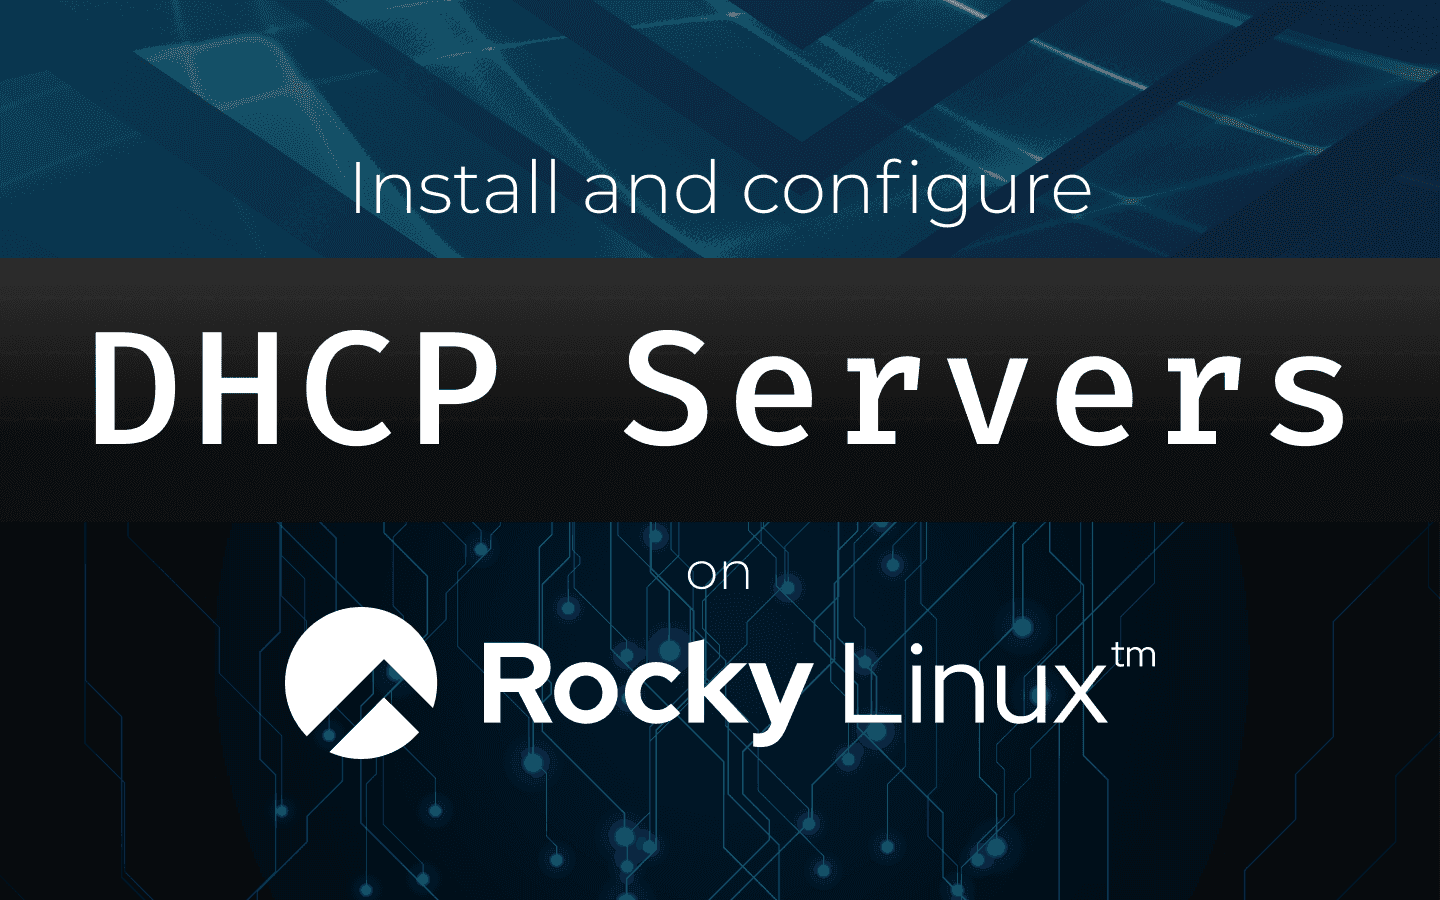 How to Install and Configure a DHCP Server on Rocky Linux